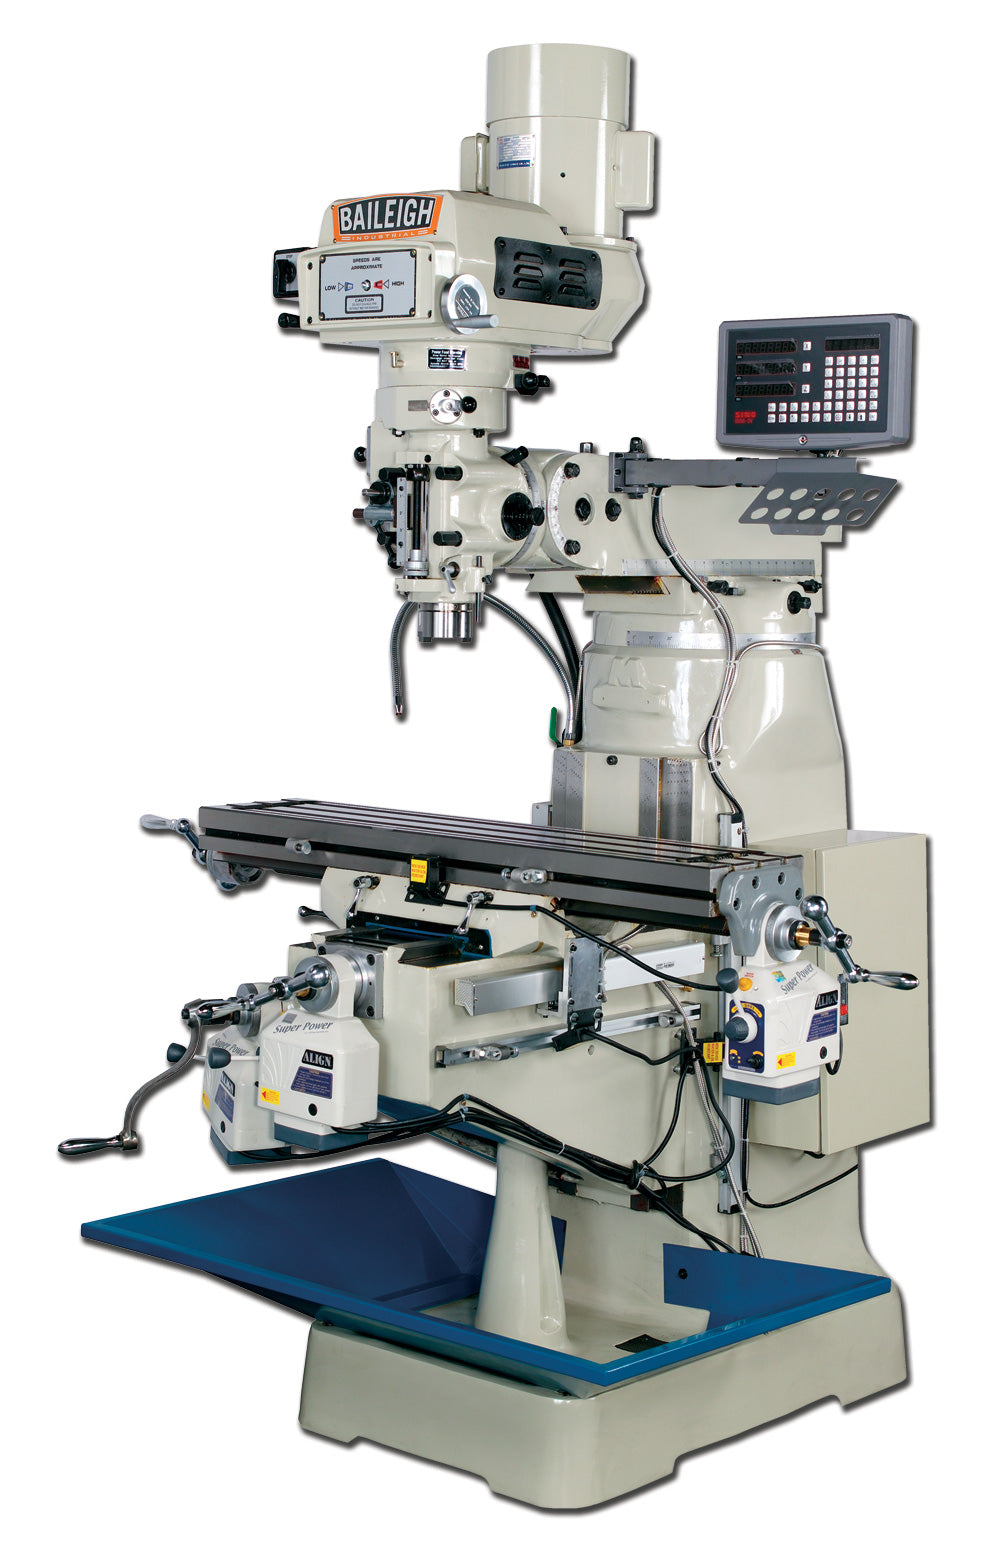 Baileigh VM-942-1 220V 1 Phase Variable Speed Vertical Milling Machine 9" x 42" Table